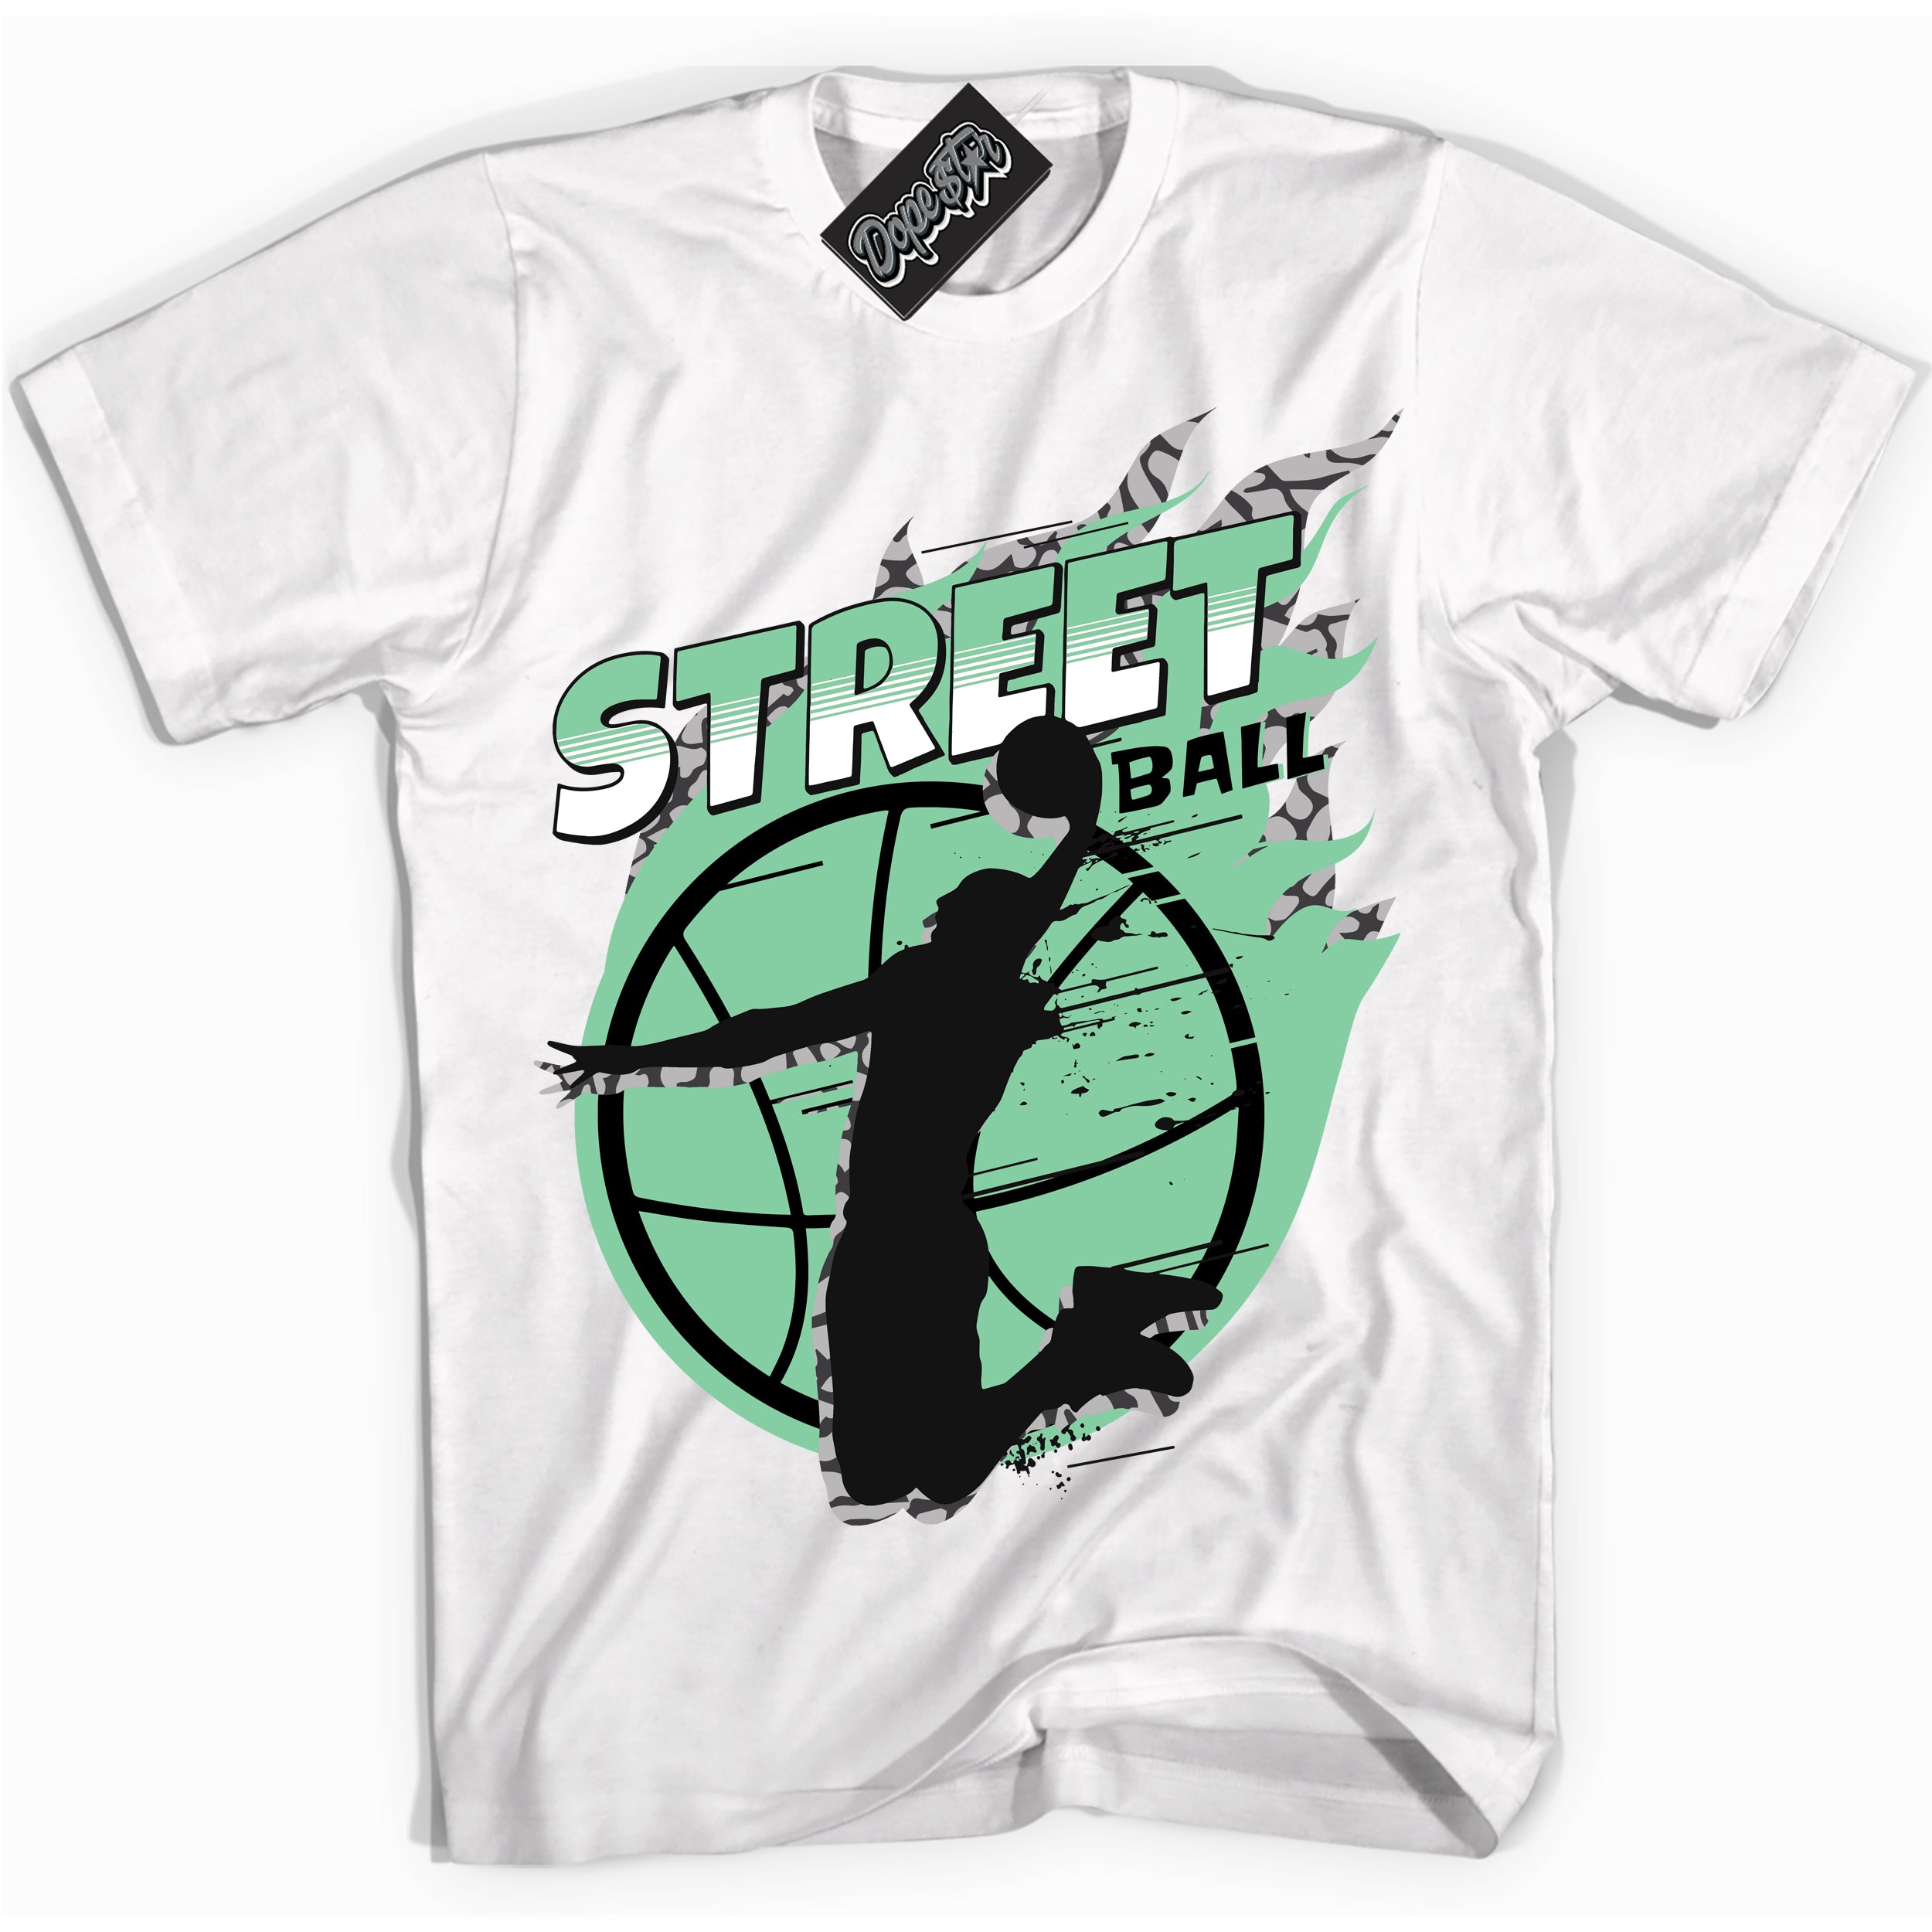 Cool White graphic tee with “ Street Ball ” design, that perfectly matches Green Glow 3s sneakers 